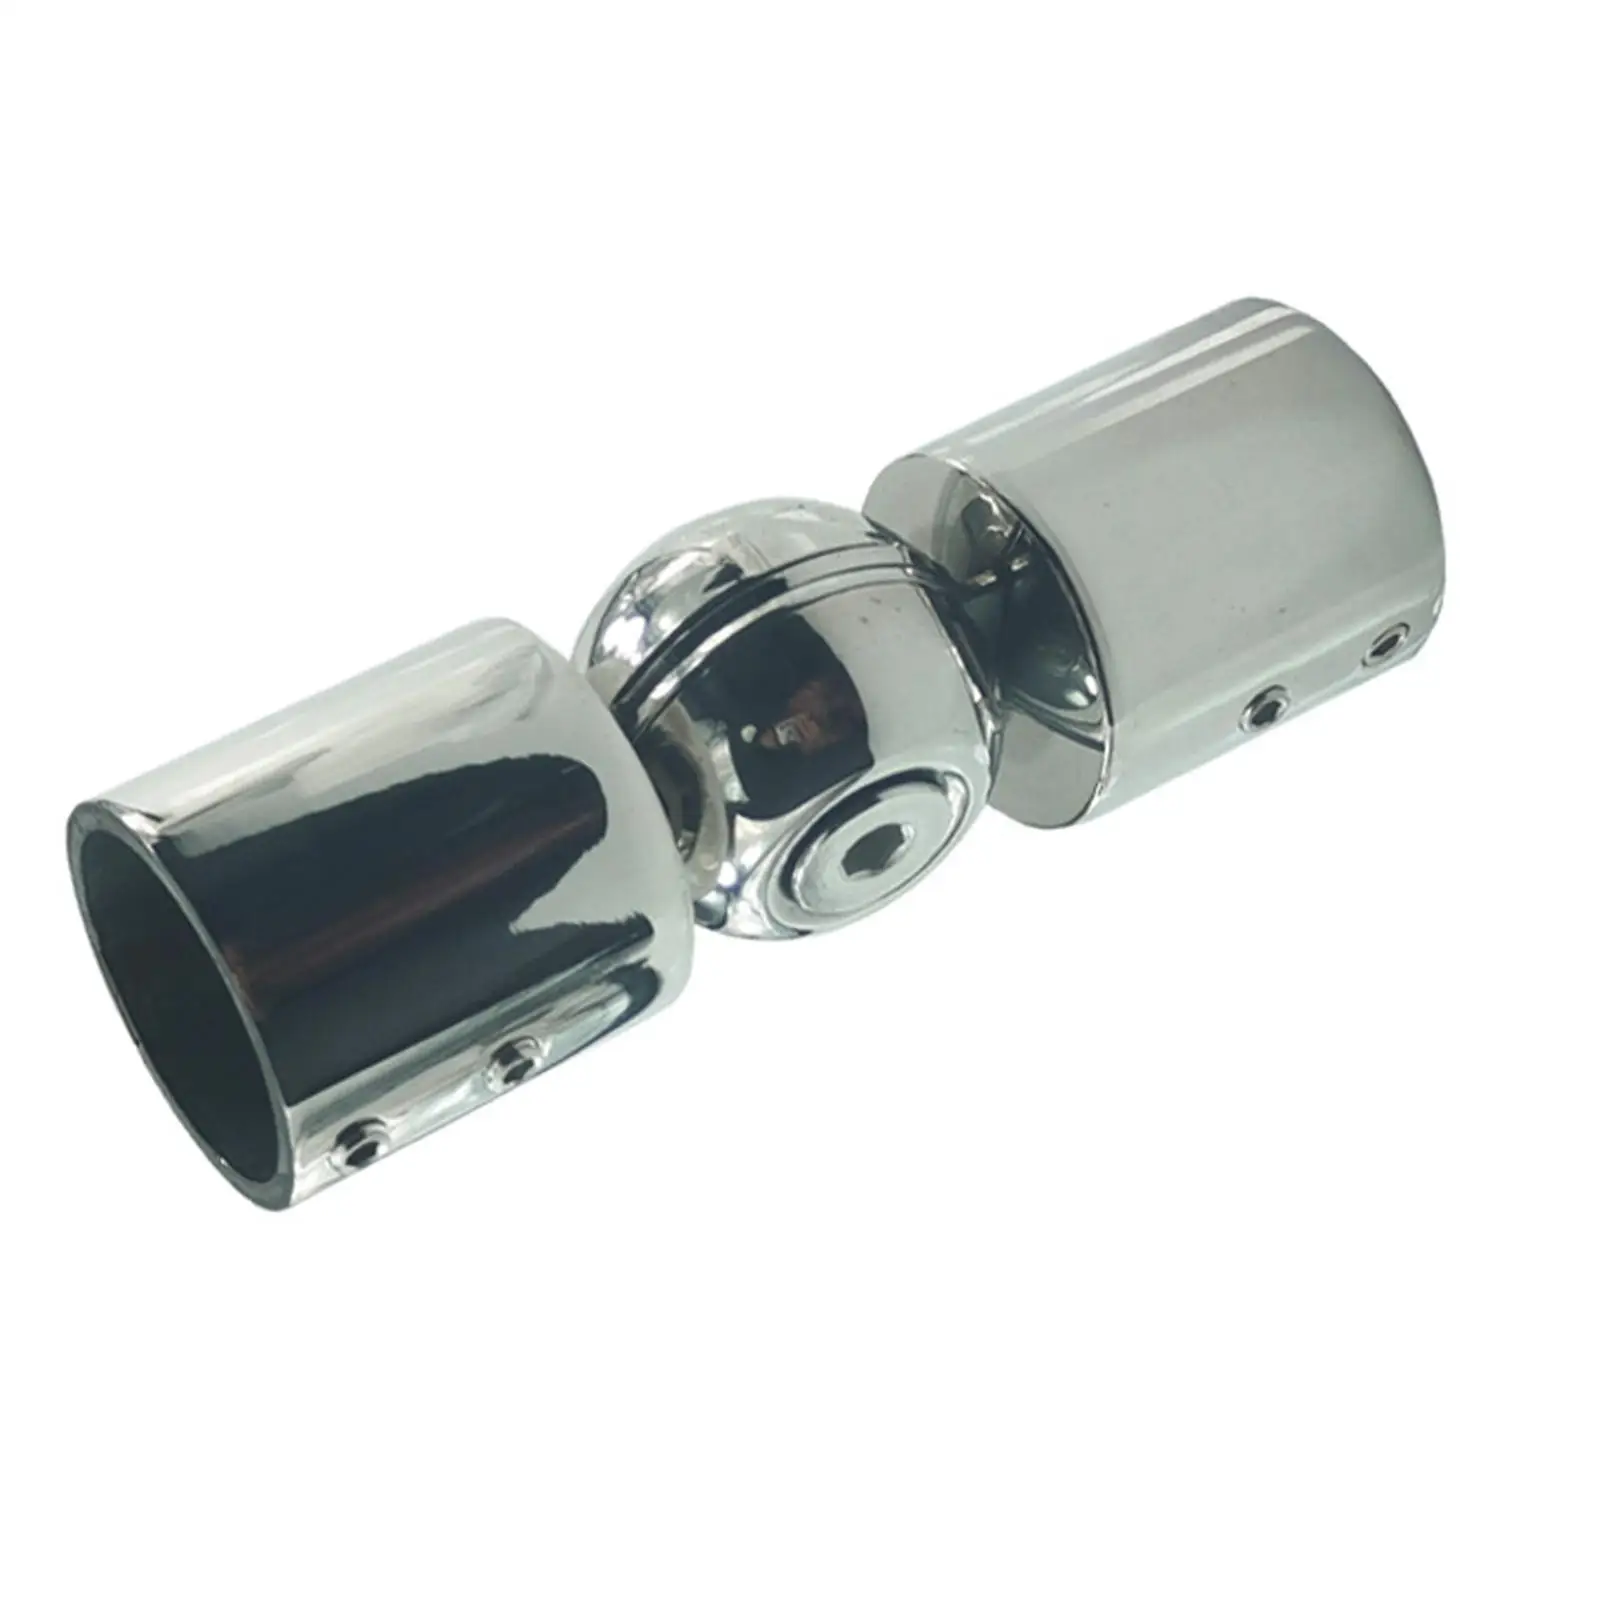 Hinged Elbow Connector From 90 Degrees to 180 Degree Curtain Rod Connector